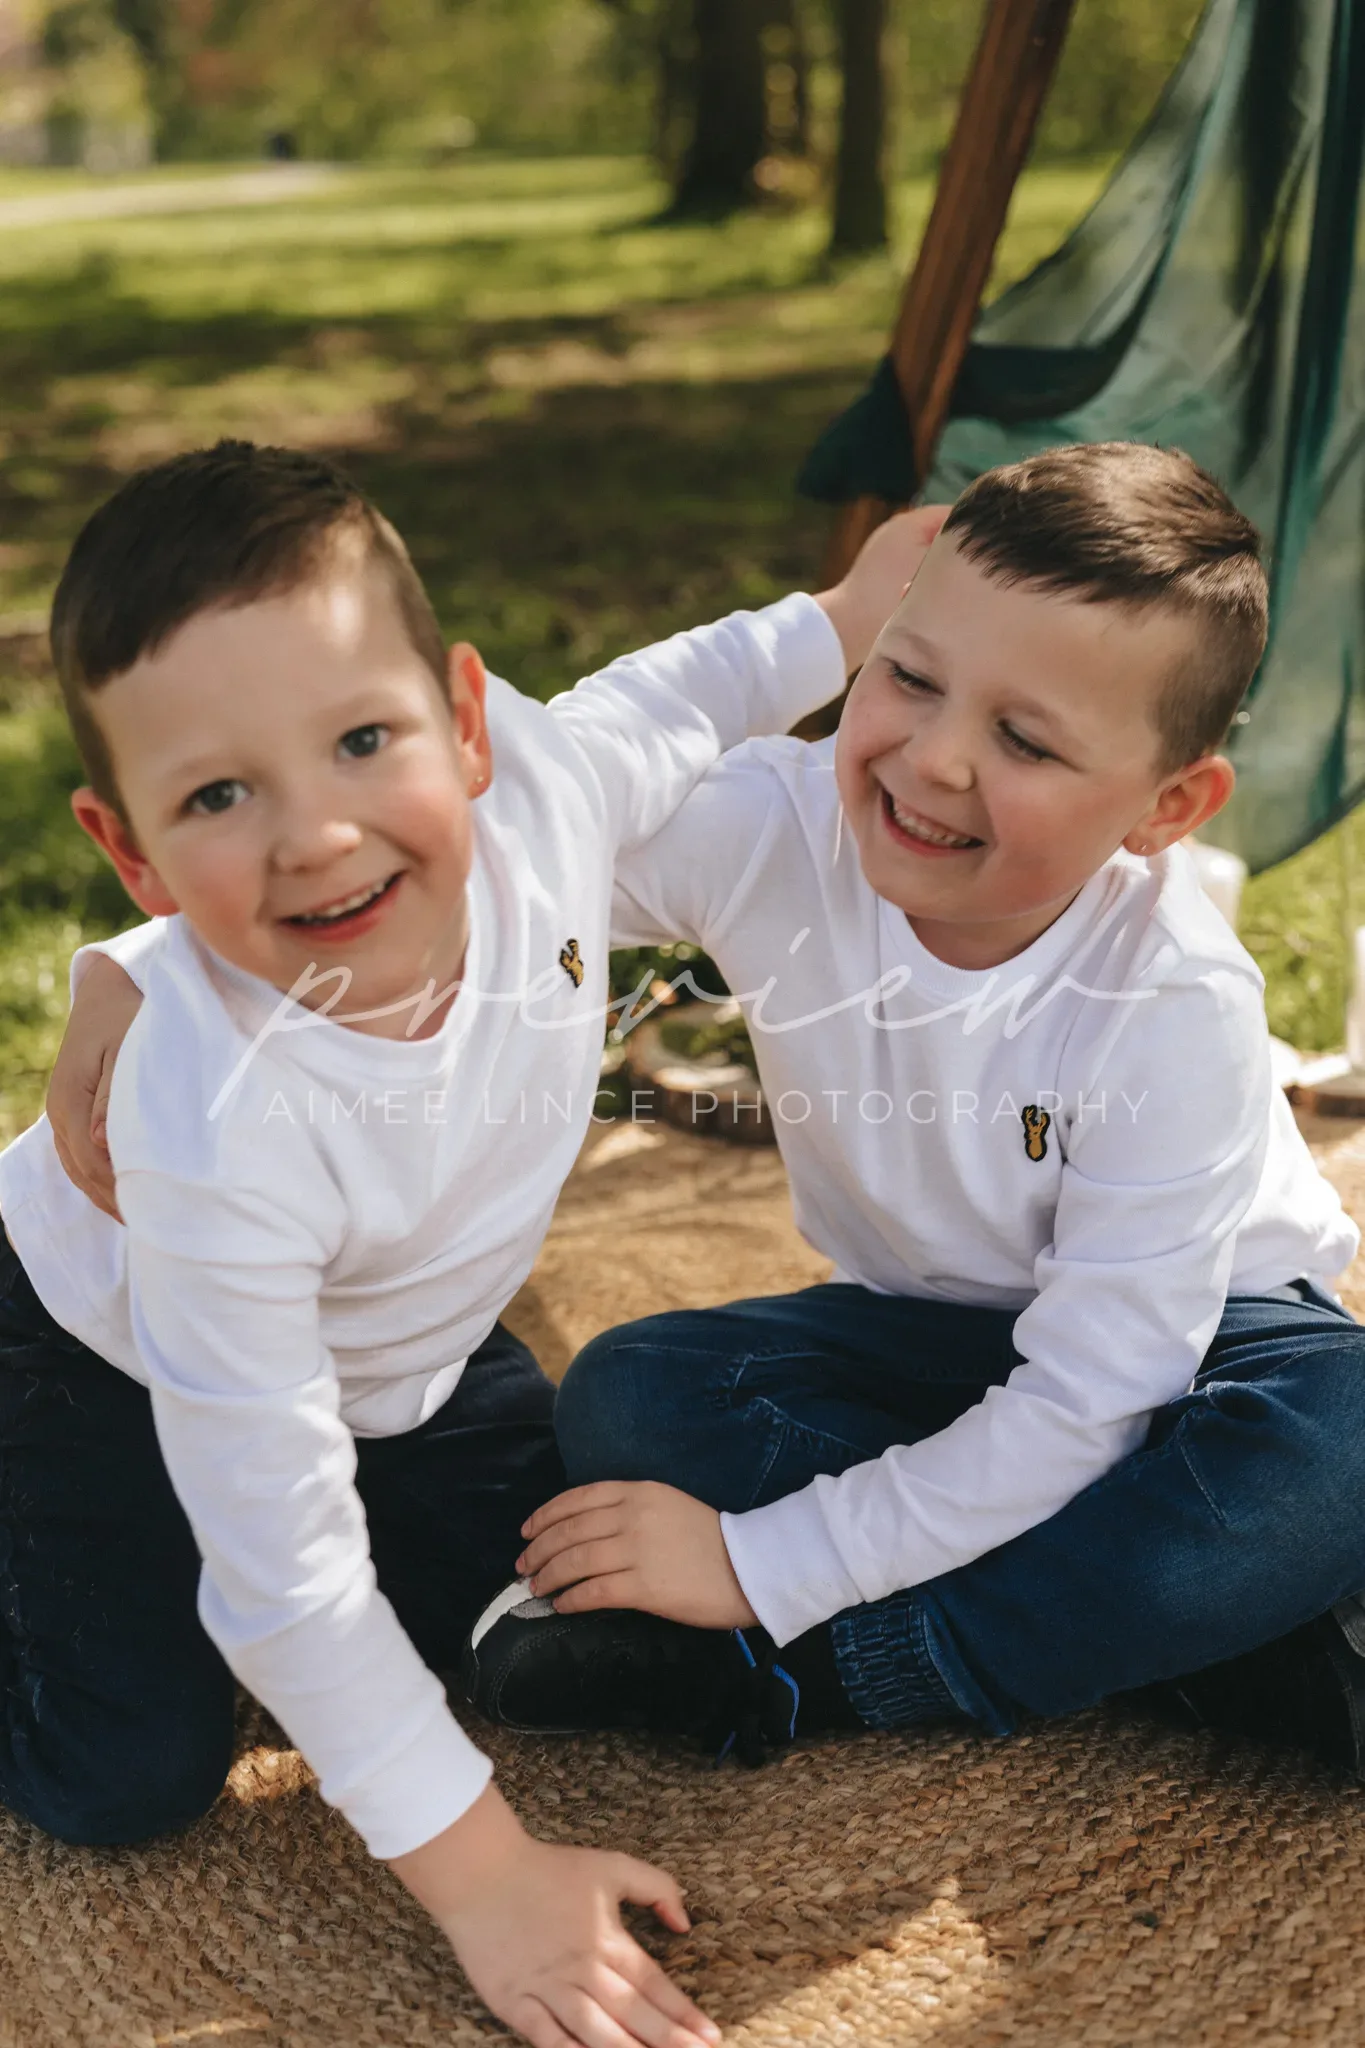 Two young boys, smiling and sitting on a burlap blanket in a sunny park, playfully interact as one reaches out to gently touch the other's ear. both are dressed in white shirts with a small bee emblem.